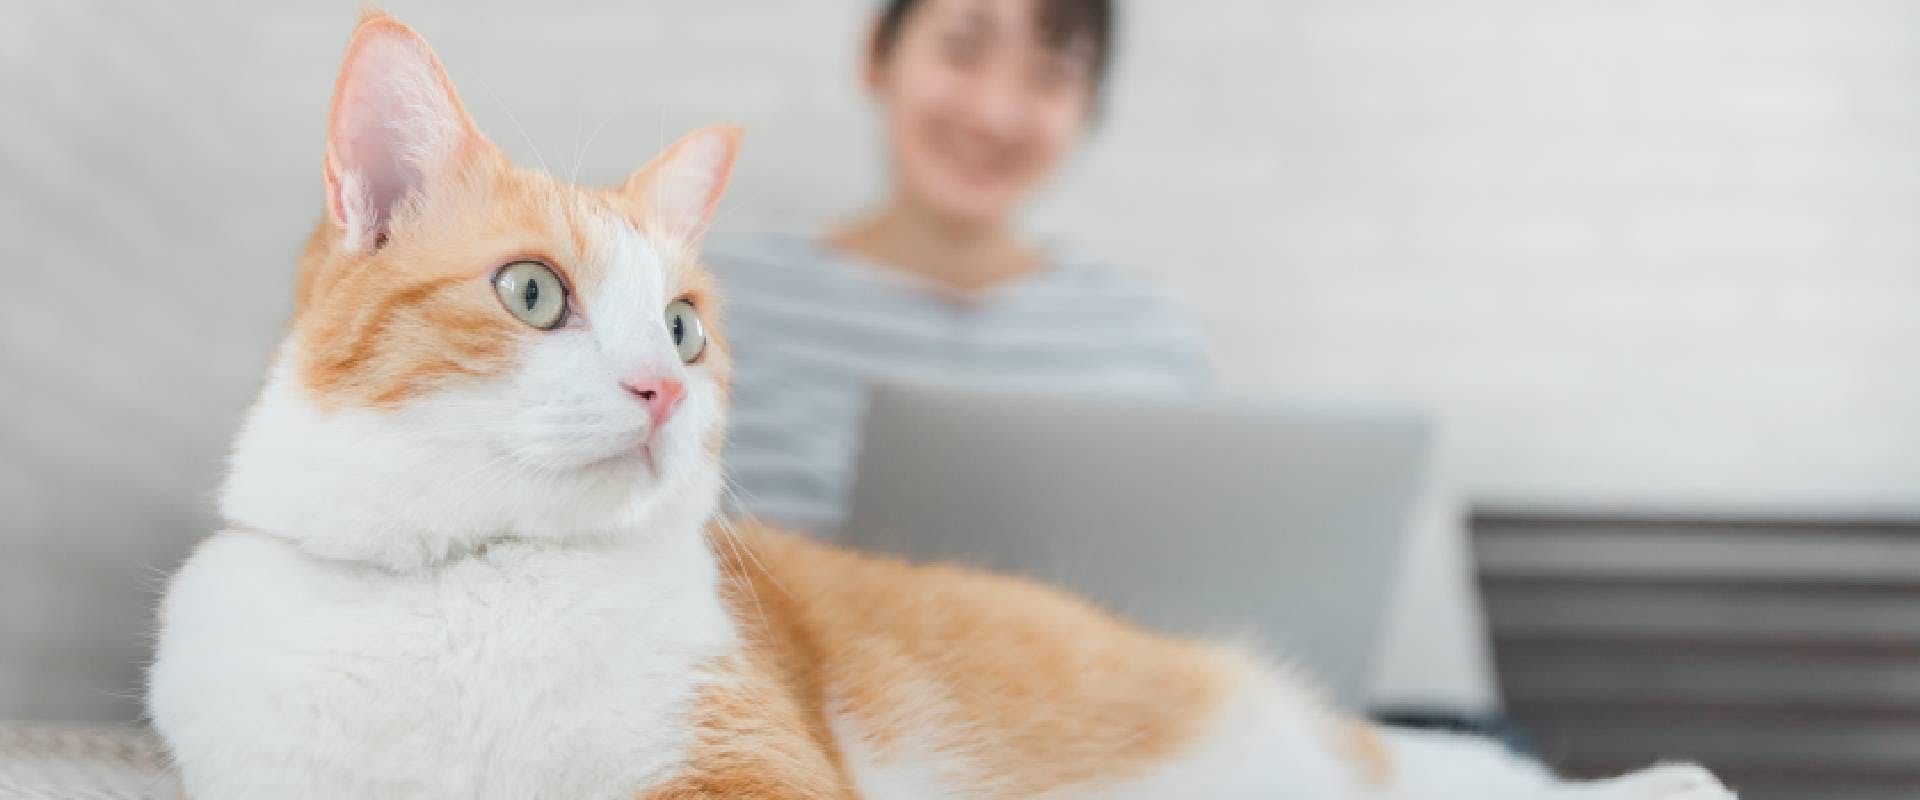 White and ginger cat with a person on a laptop in the background